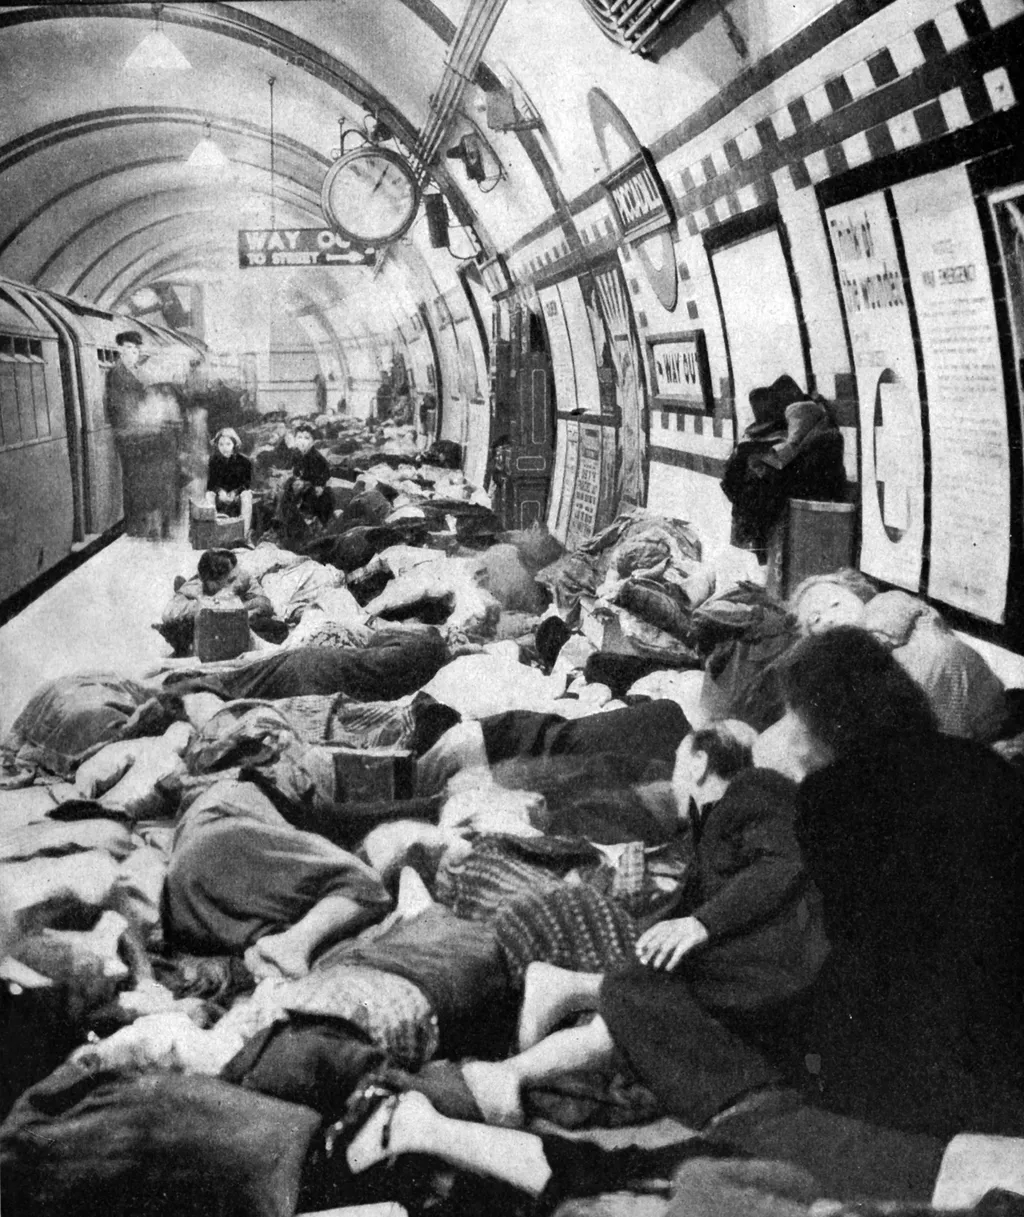 Londoners sheltering Photograph WWII 20th century 1940s Forties Station Sleeping Sheltering Civilians Danger Square Vertical SECOND WORLD WAR SHELTER METRO BOMBING ATTACK 